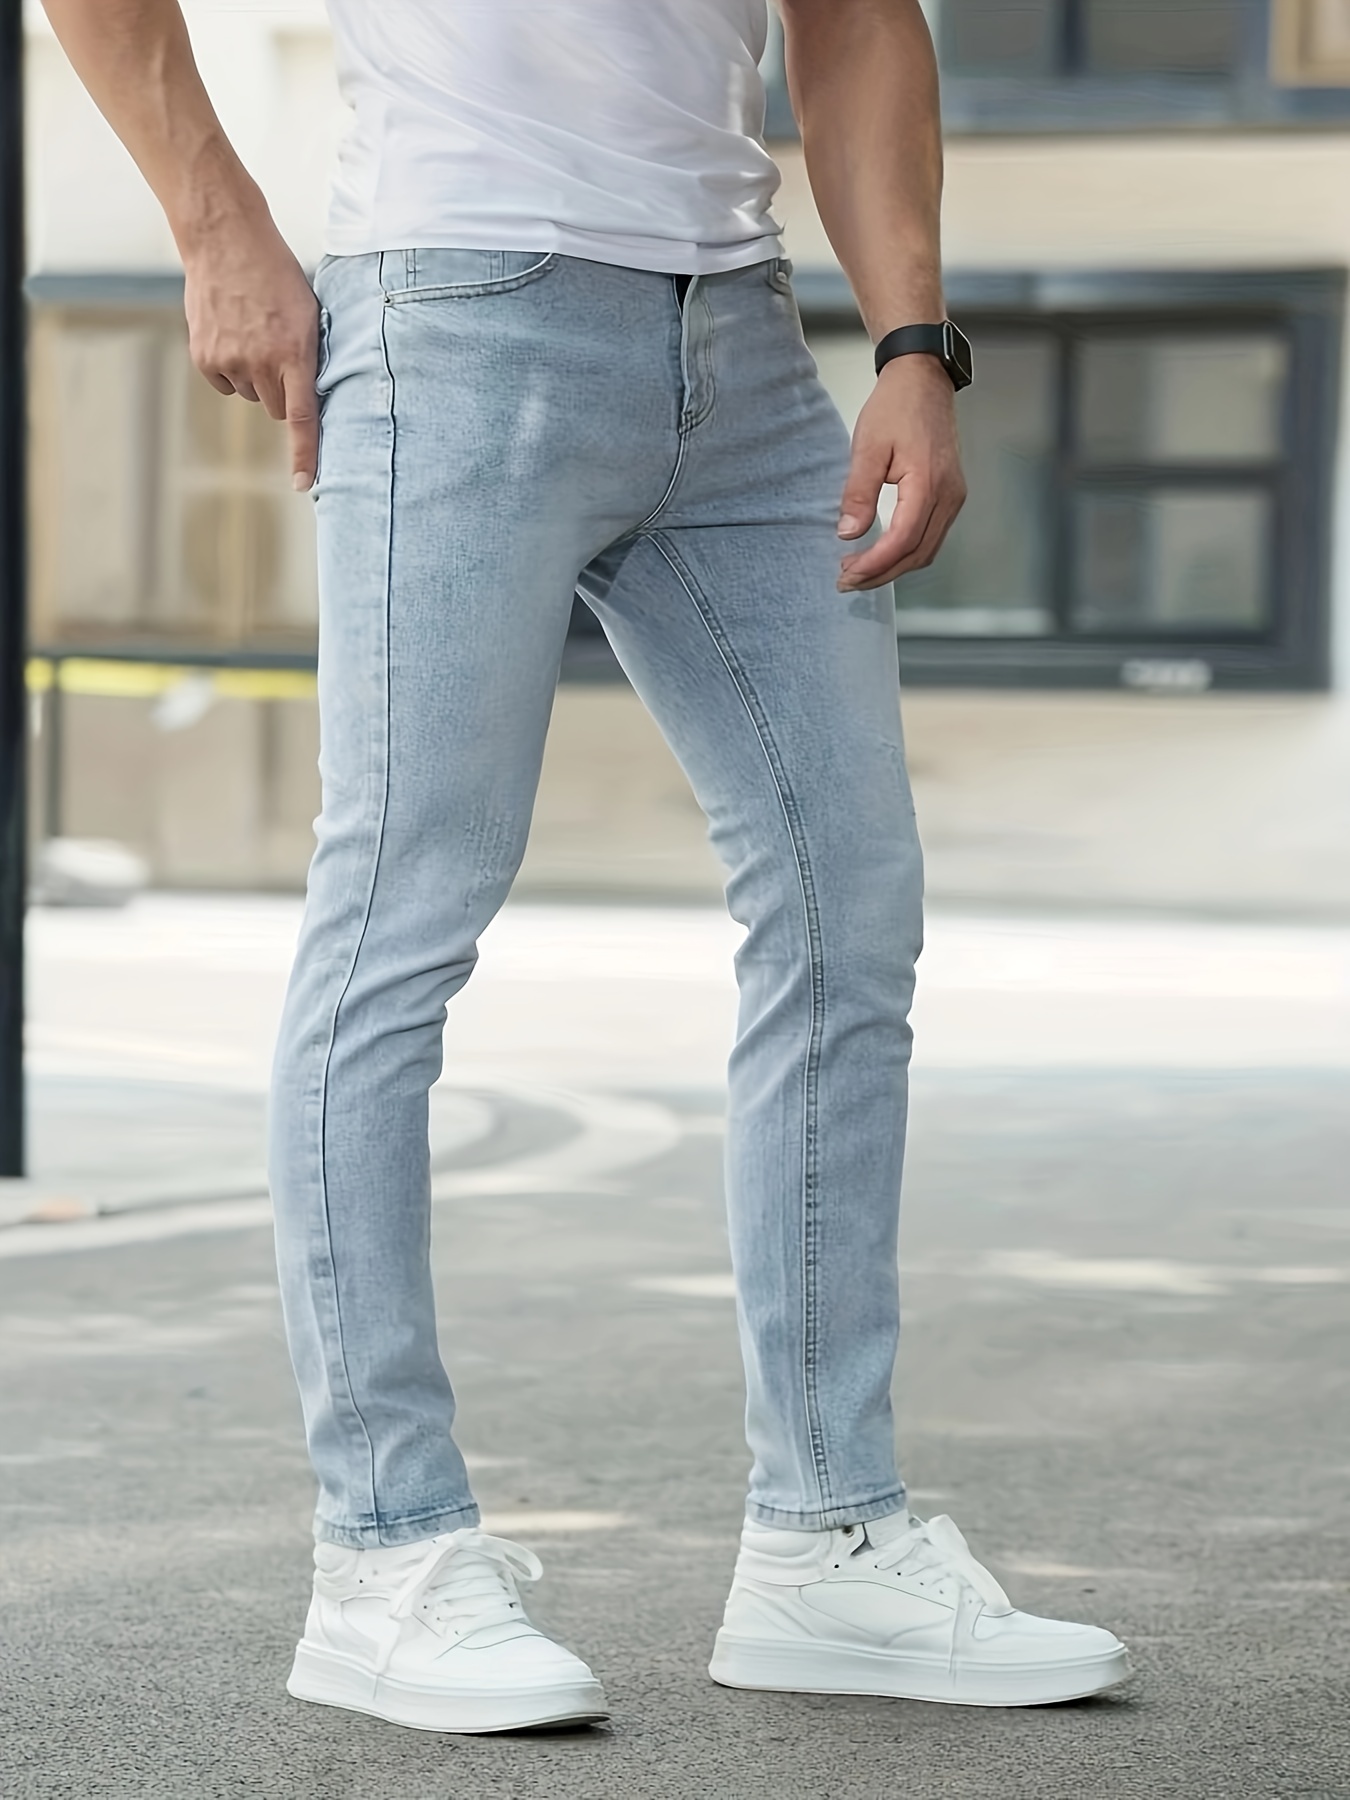 Slim Fit Denim VS Straight Fit Denim - Which Is Better Styled With